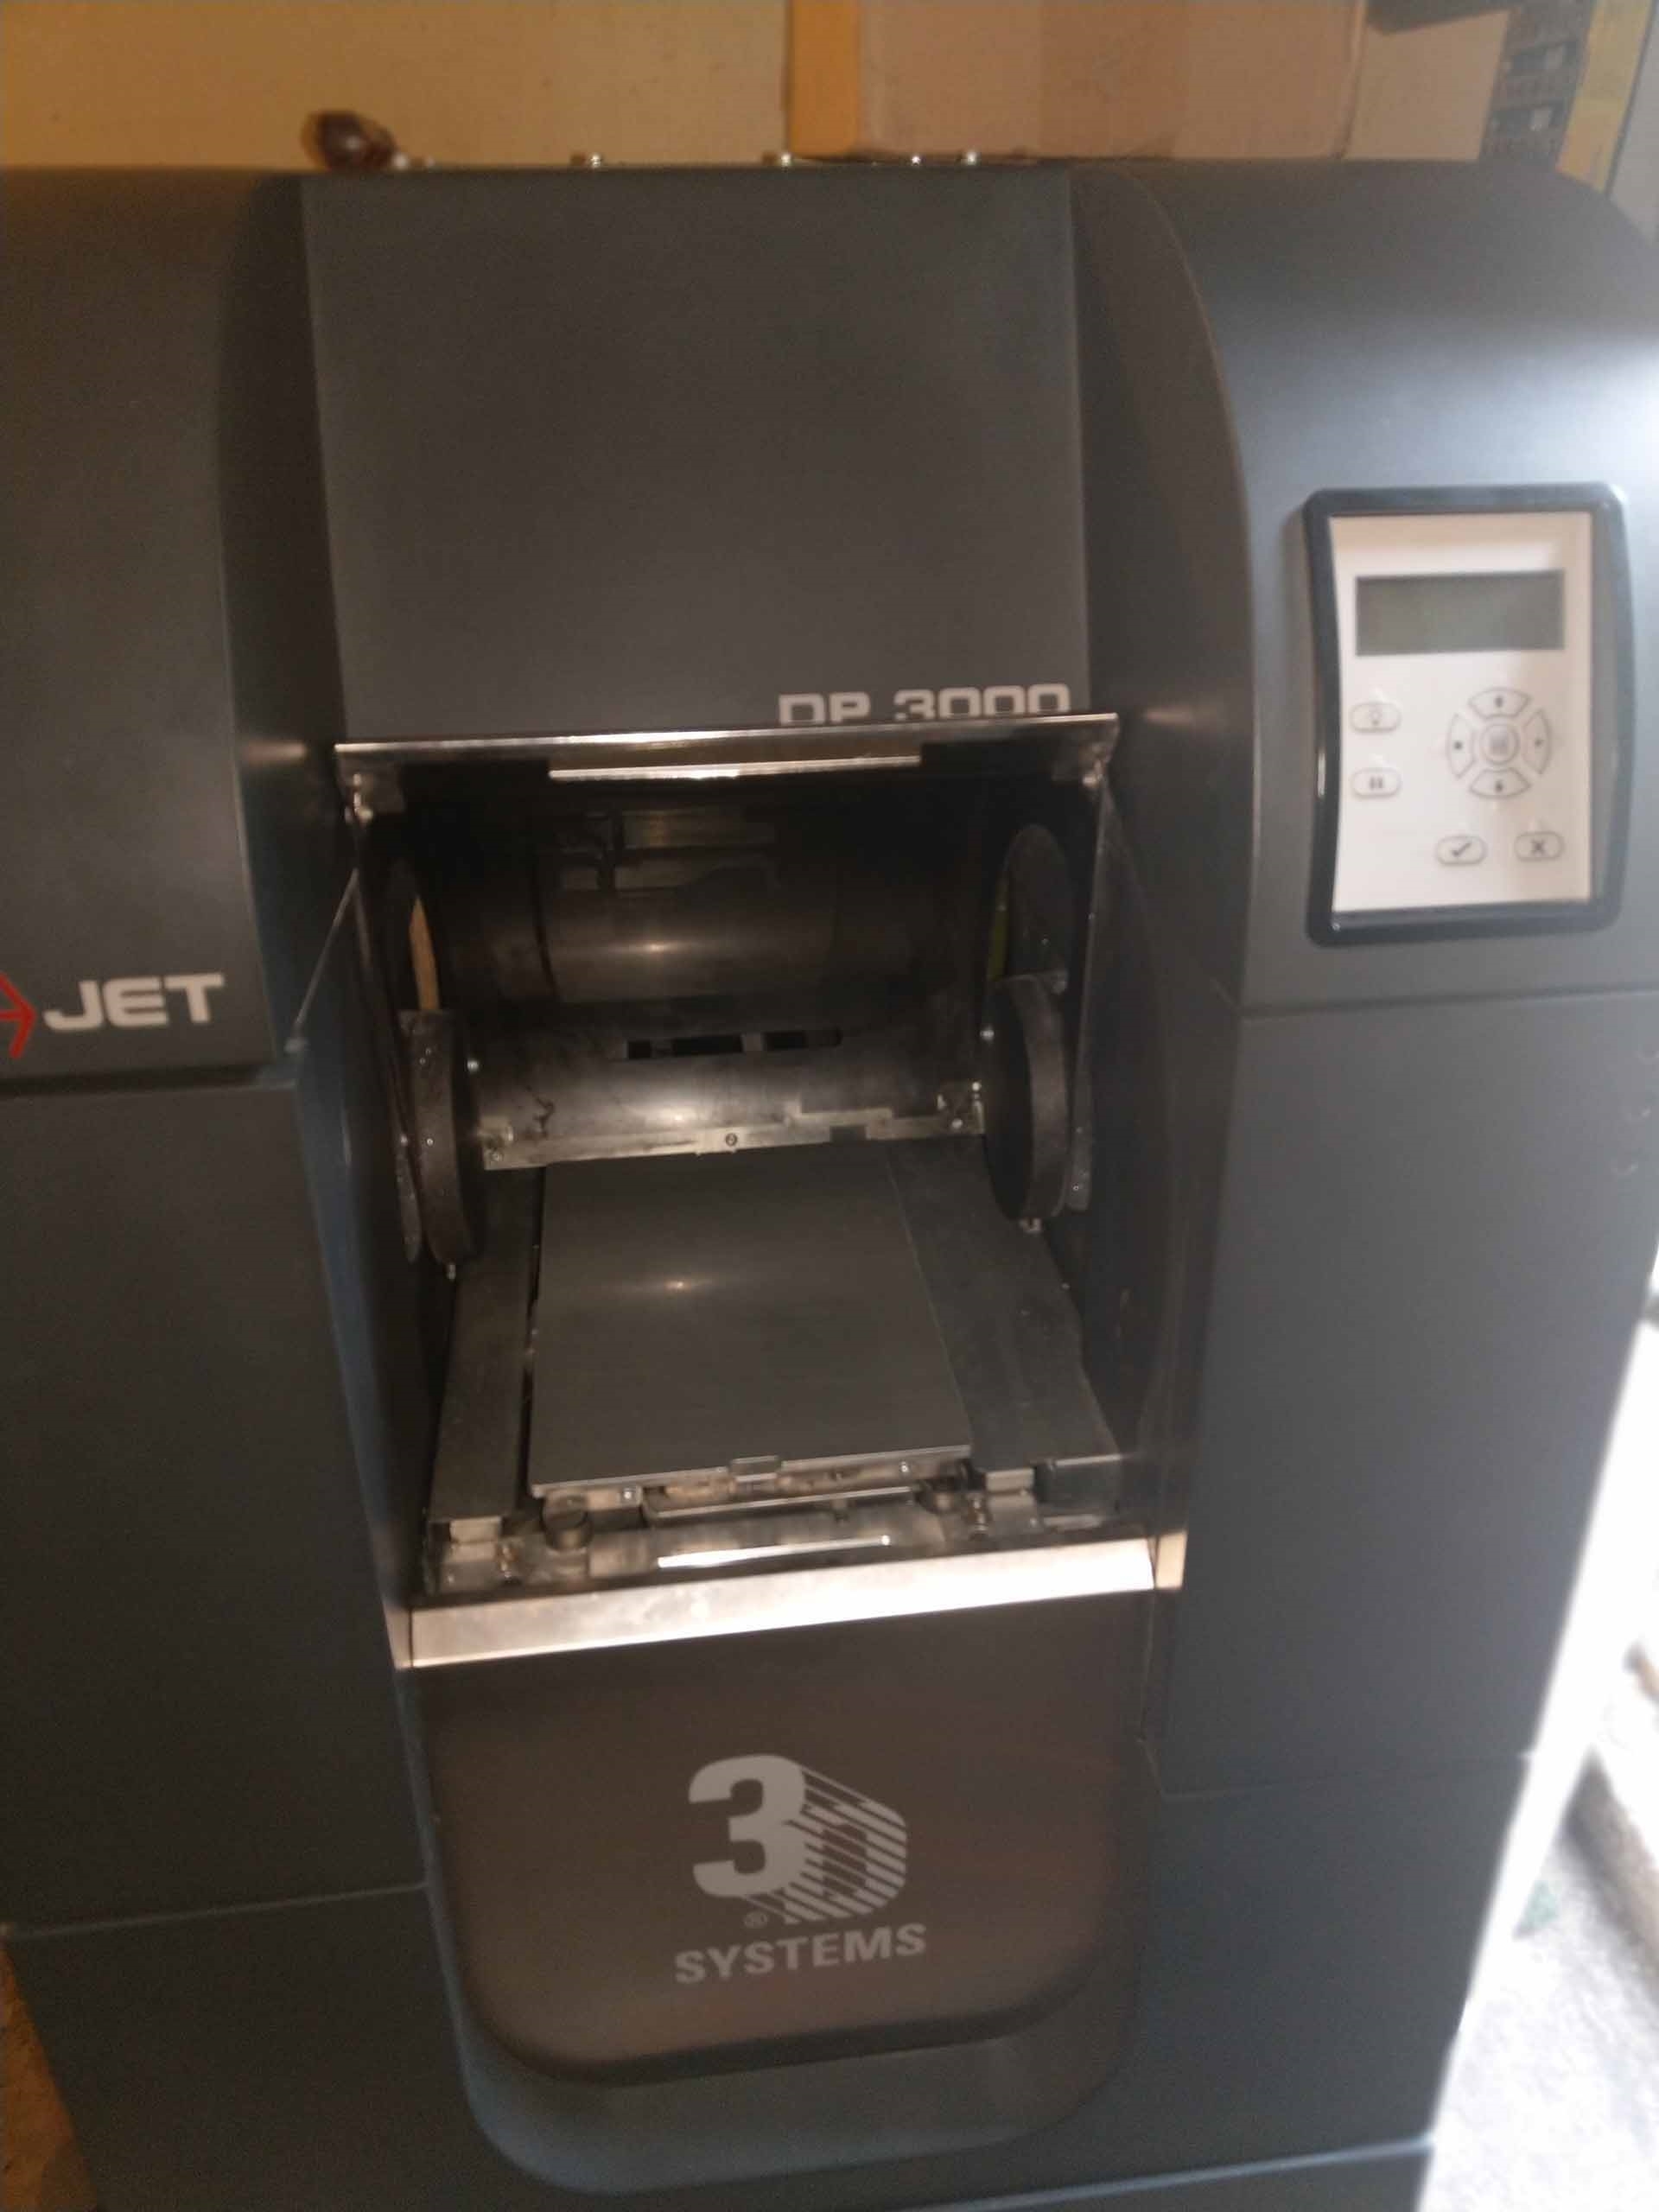 Accepteret stamtavle markør 3D SYSTEMS ProJet DP 3000 Printer Used for sale price #9220718, > buy from  CAE